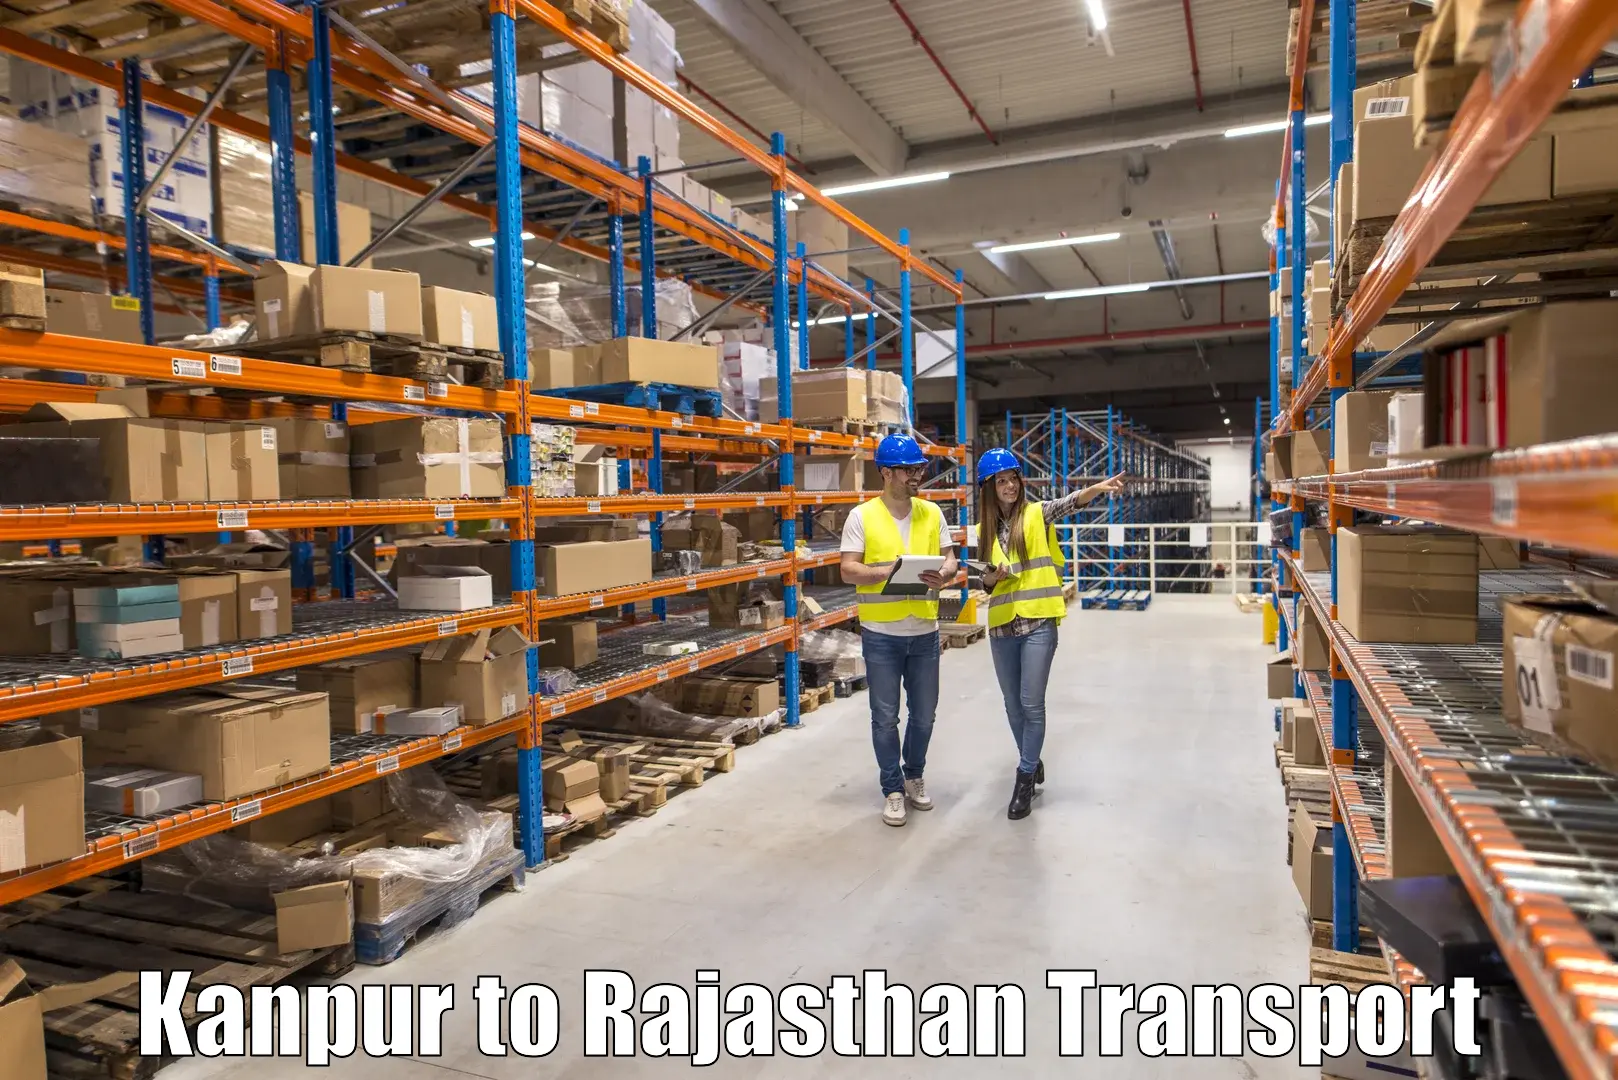 Air freight transport services Kanpur to Mathania